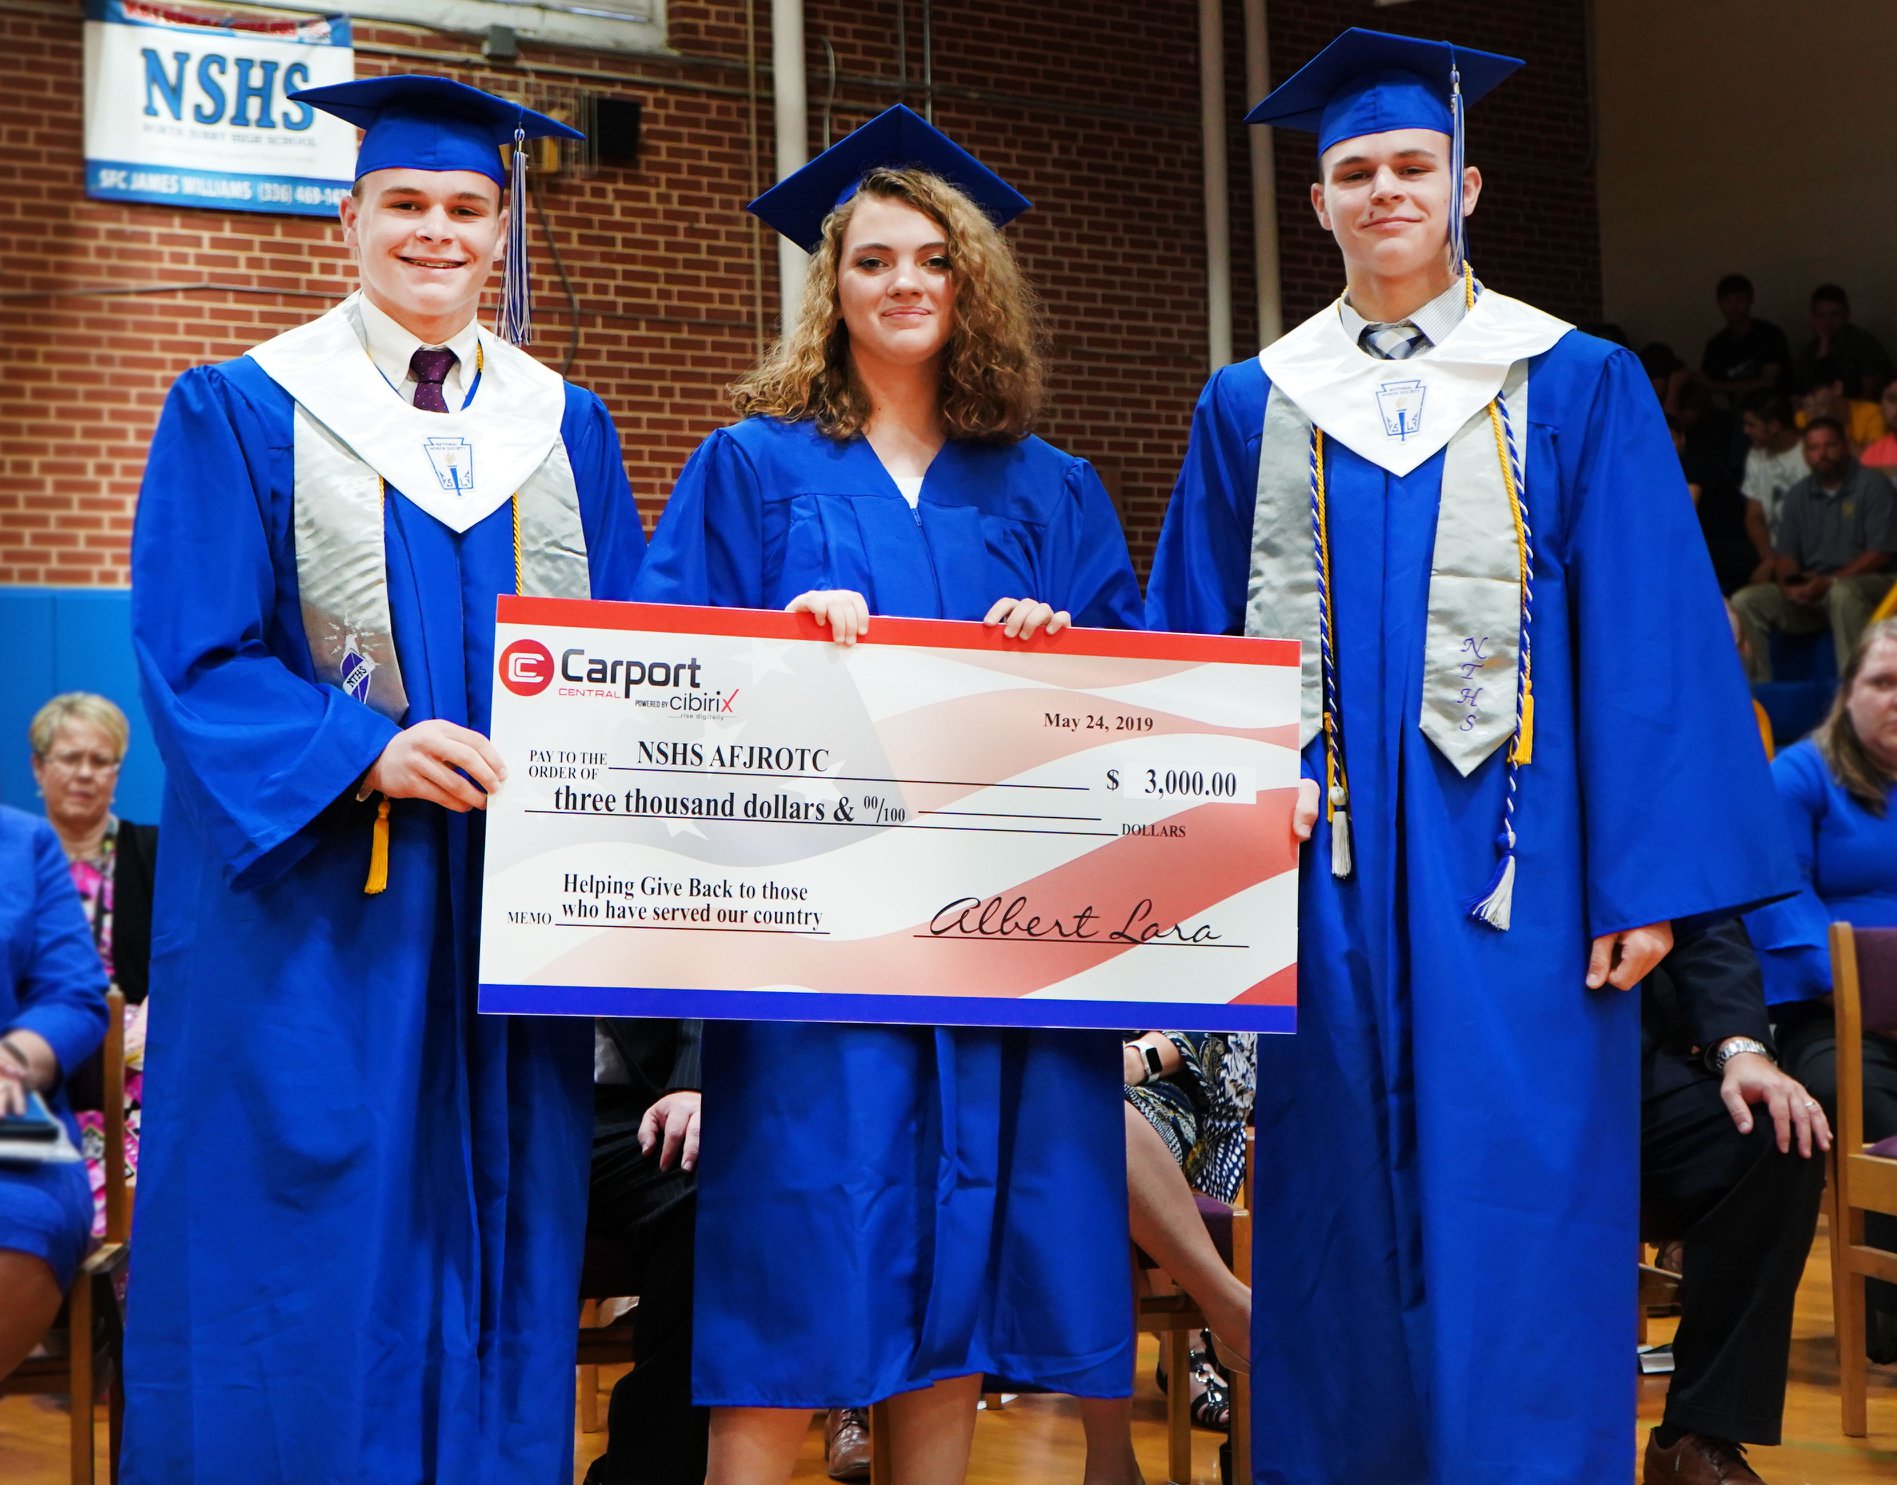 carport-central-proud-to-donate-to-the-afjrotc-as-part-of-north-surry-high-school-senior-awards-ceremony